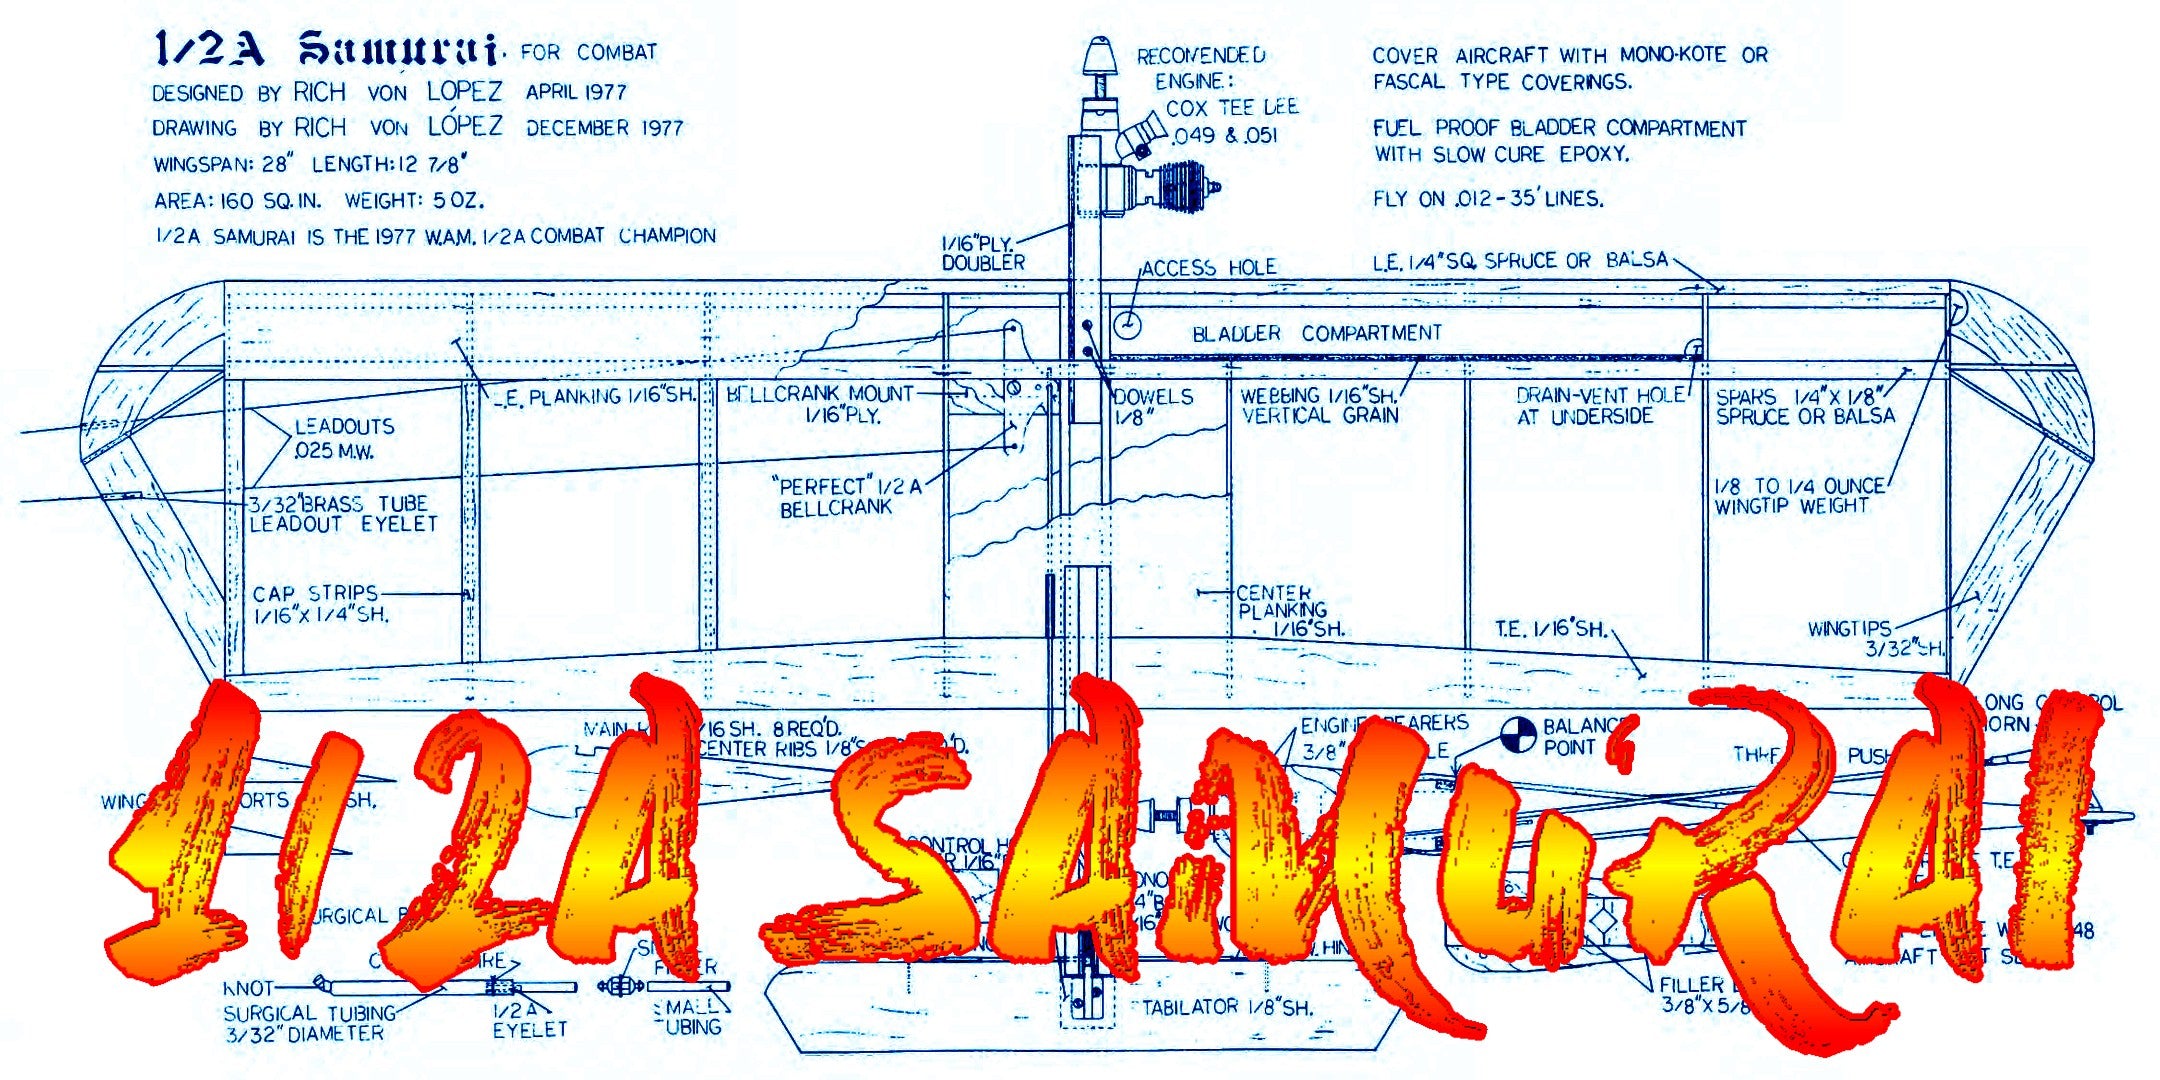 full size printed plan & building notes *1/2a combat samurai* w/s 28” engine 1/2a